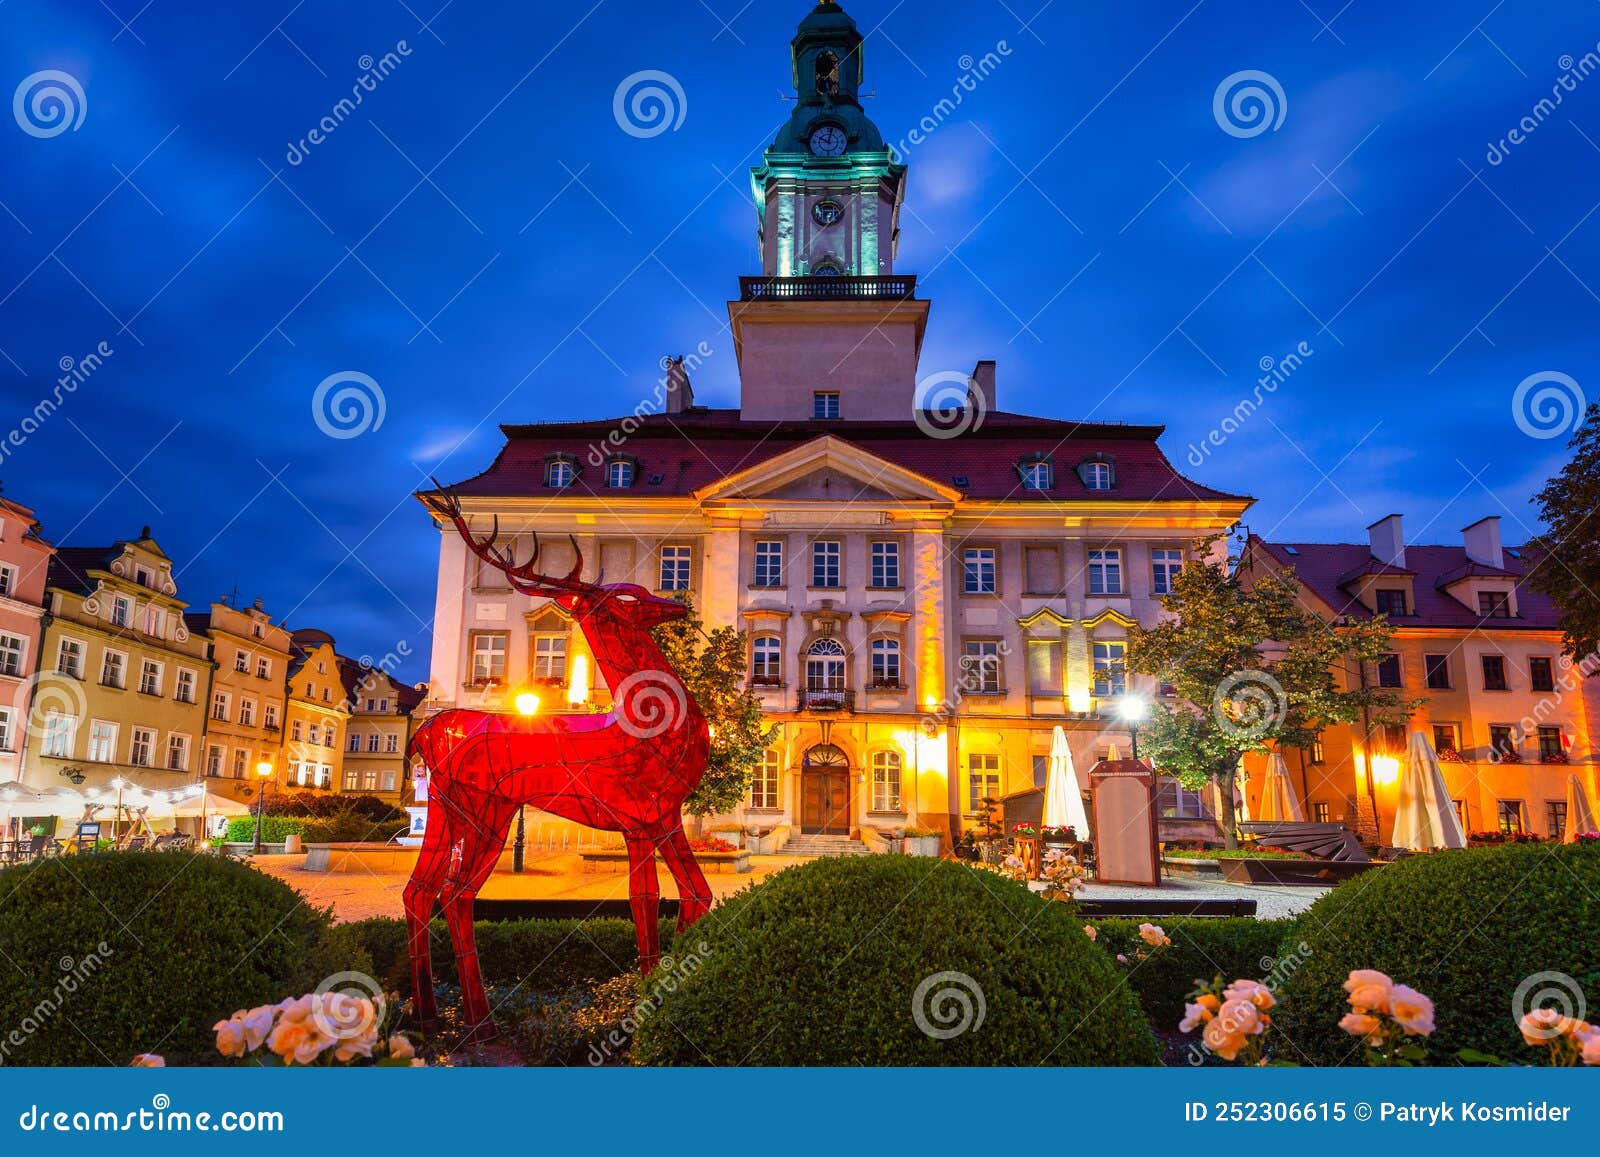 a glass deer as the emblem of the jelenia gora city on the town hall square at dusk. poland